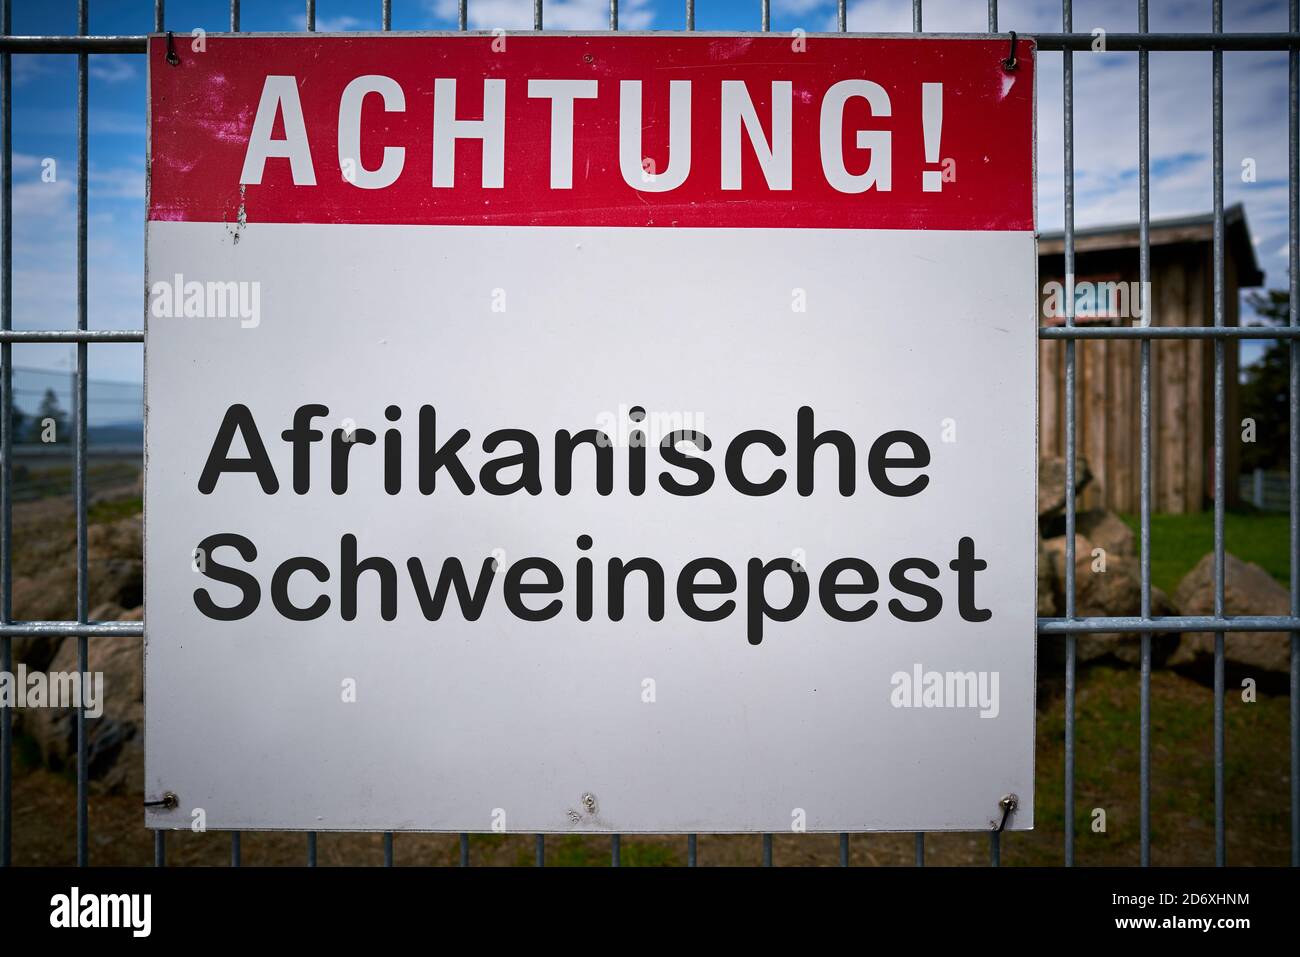 Sign with the inscription 'Achtung Afrikanische Schweinepest' (Attention African swine fever) on a fence to a farm in Germany Stock Photo